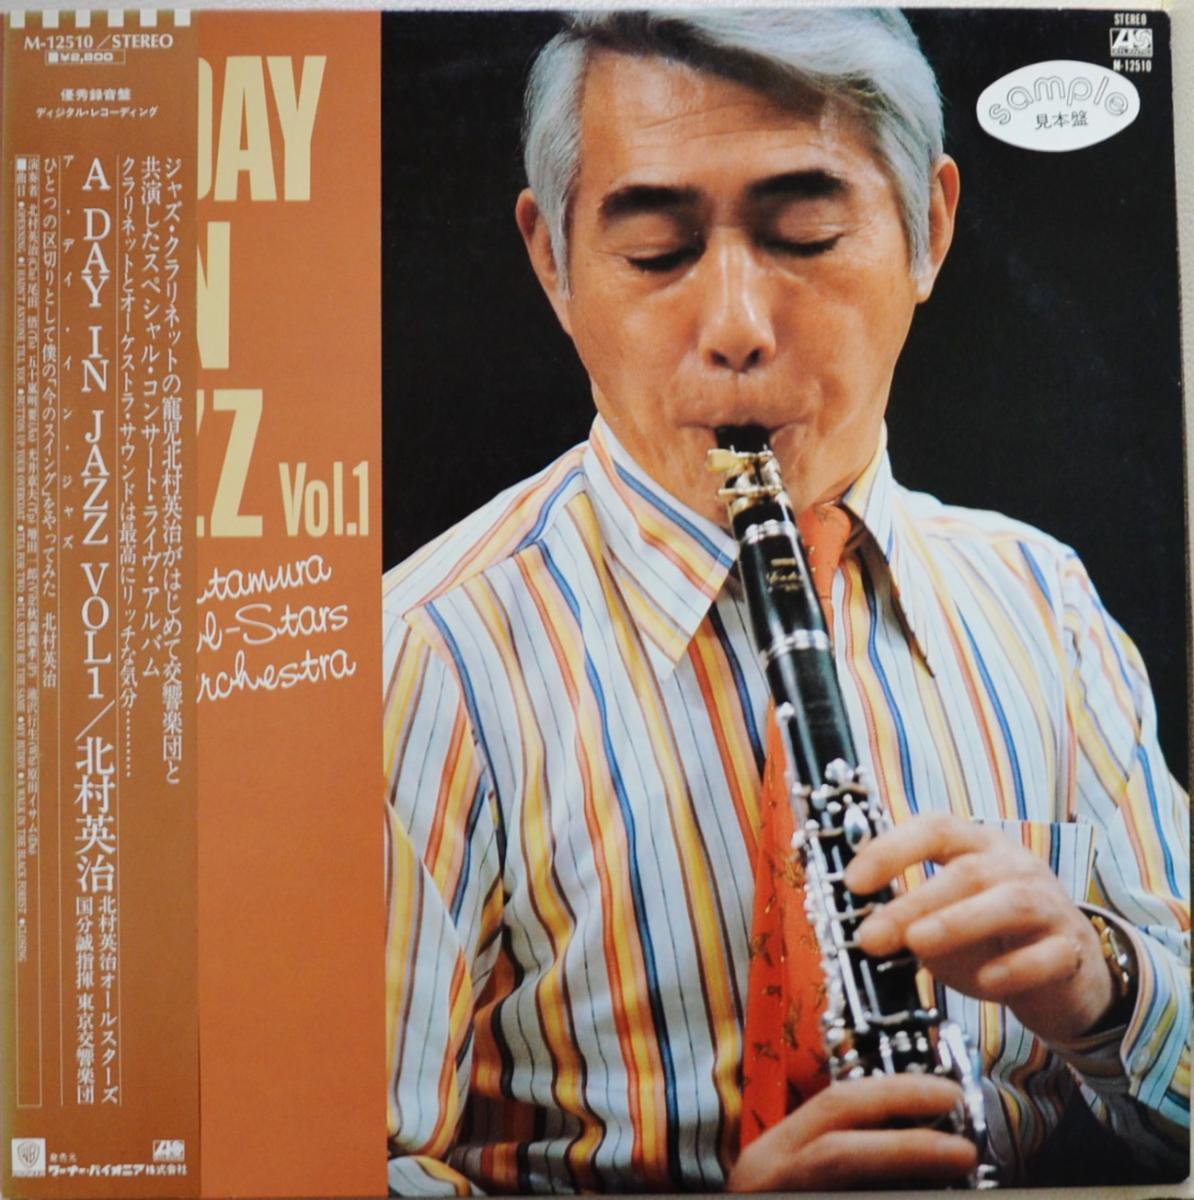 ¼Ѽ EIJI KITAMURA & HIS ALLSTARS WITH ORCHESTRA / A DAY IN JAZZ VOL.1 (LP)